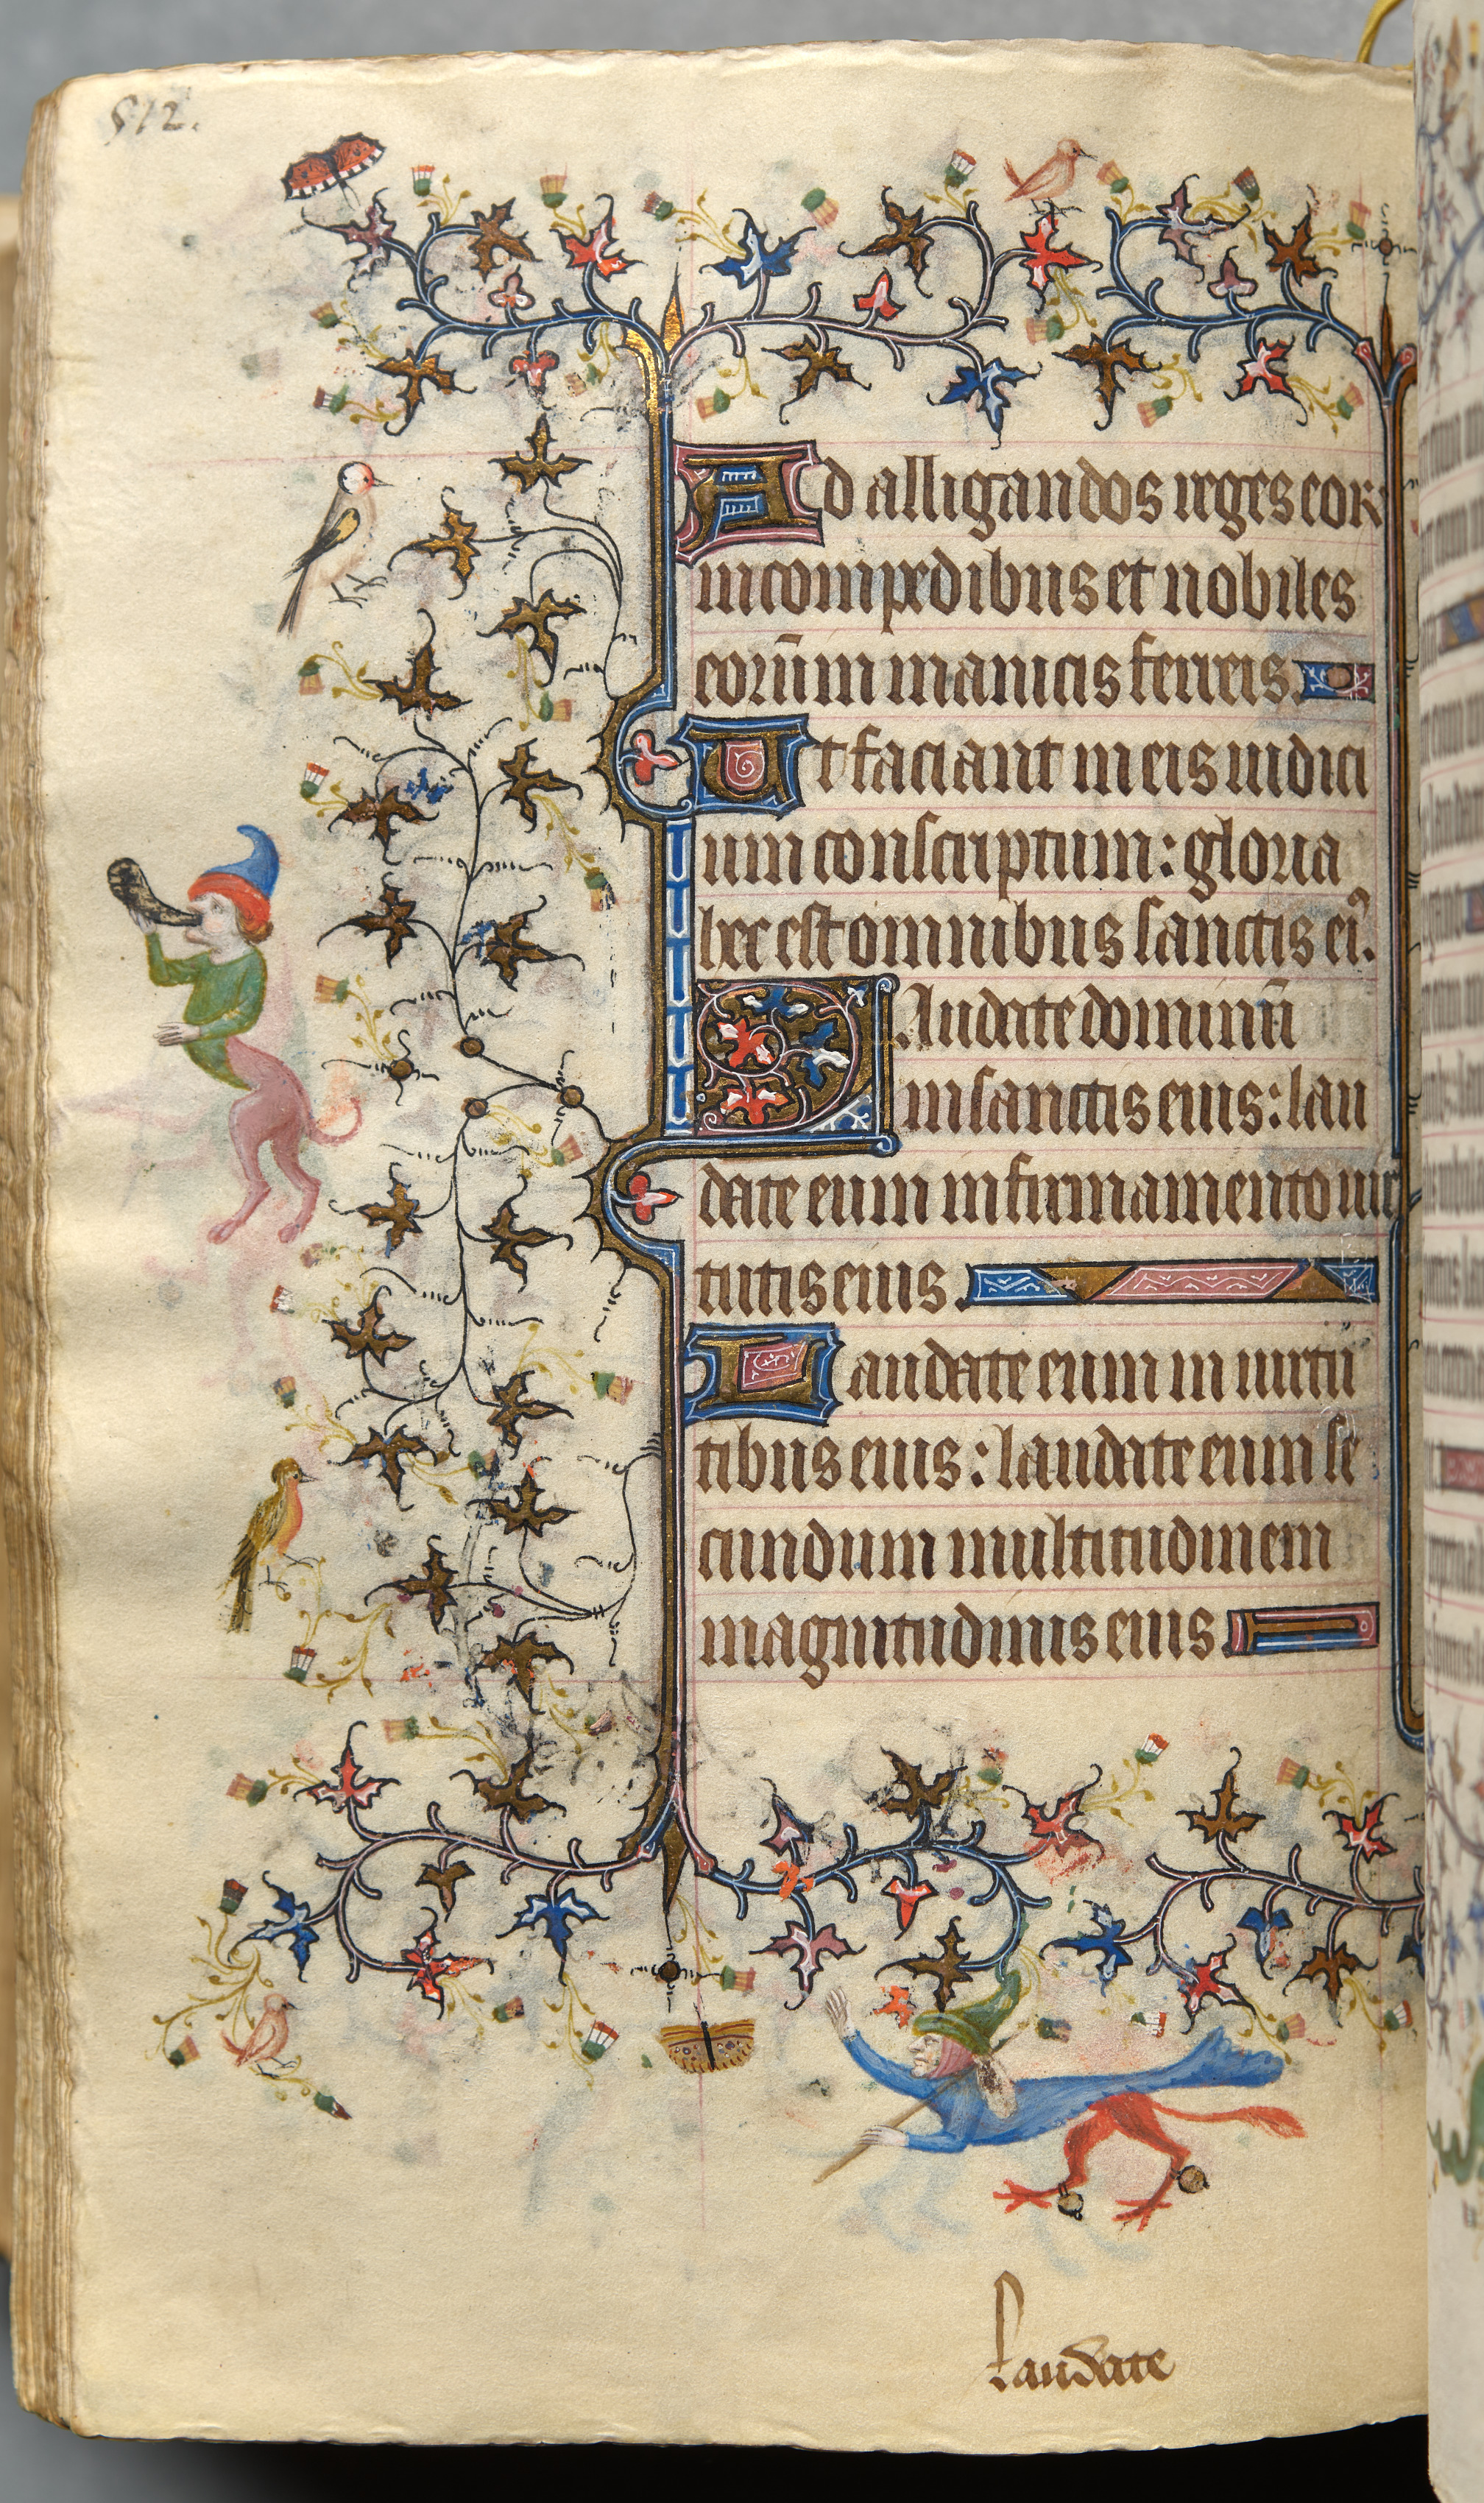 Hours of Charles the Noble, King of Navarre (1361-1425): fol. 250v, Text